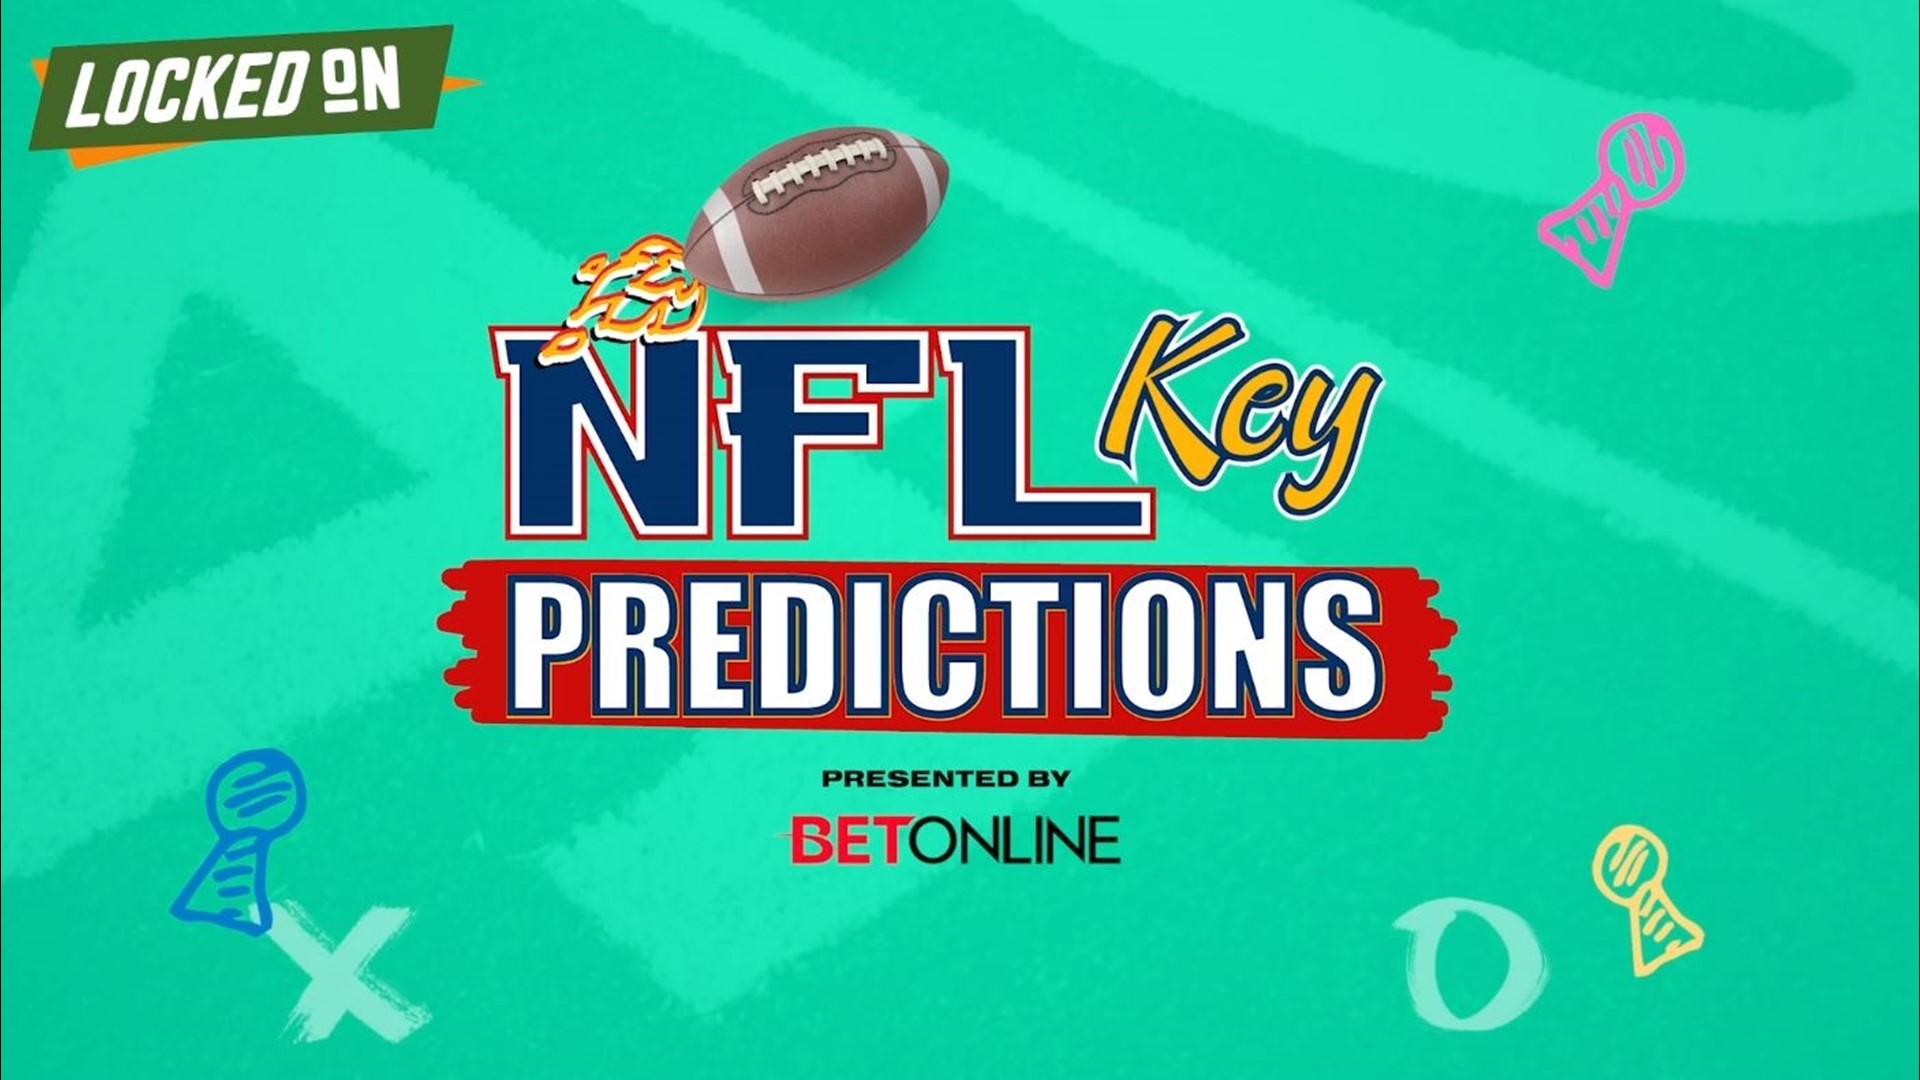 NFL Key Predictions: Ready for Week 7